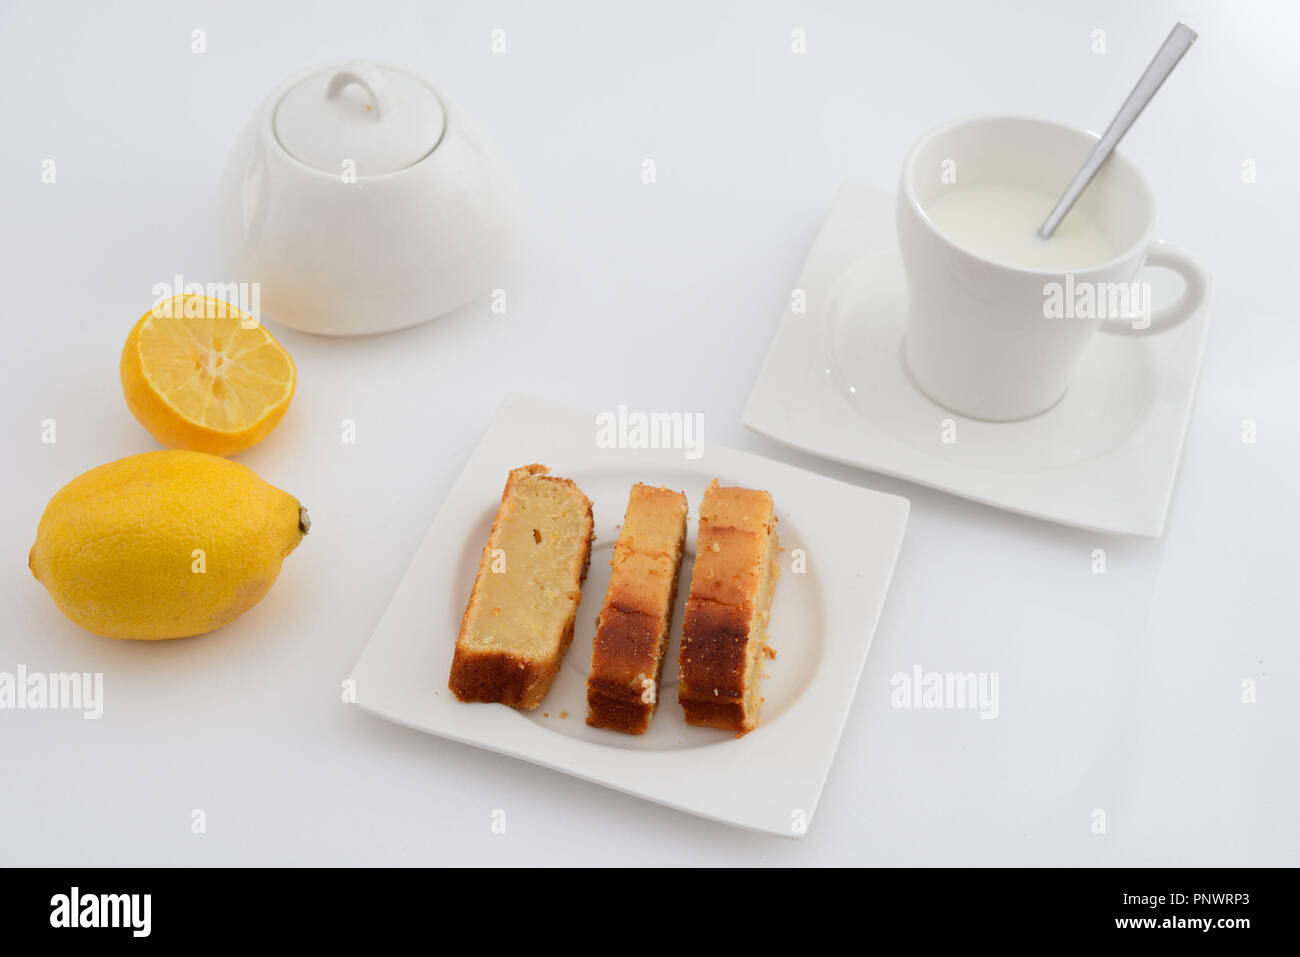 Breakfast. Cup with milk and lemon sponge cake on a plate. White background Stock Photo